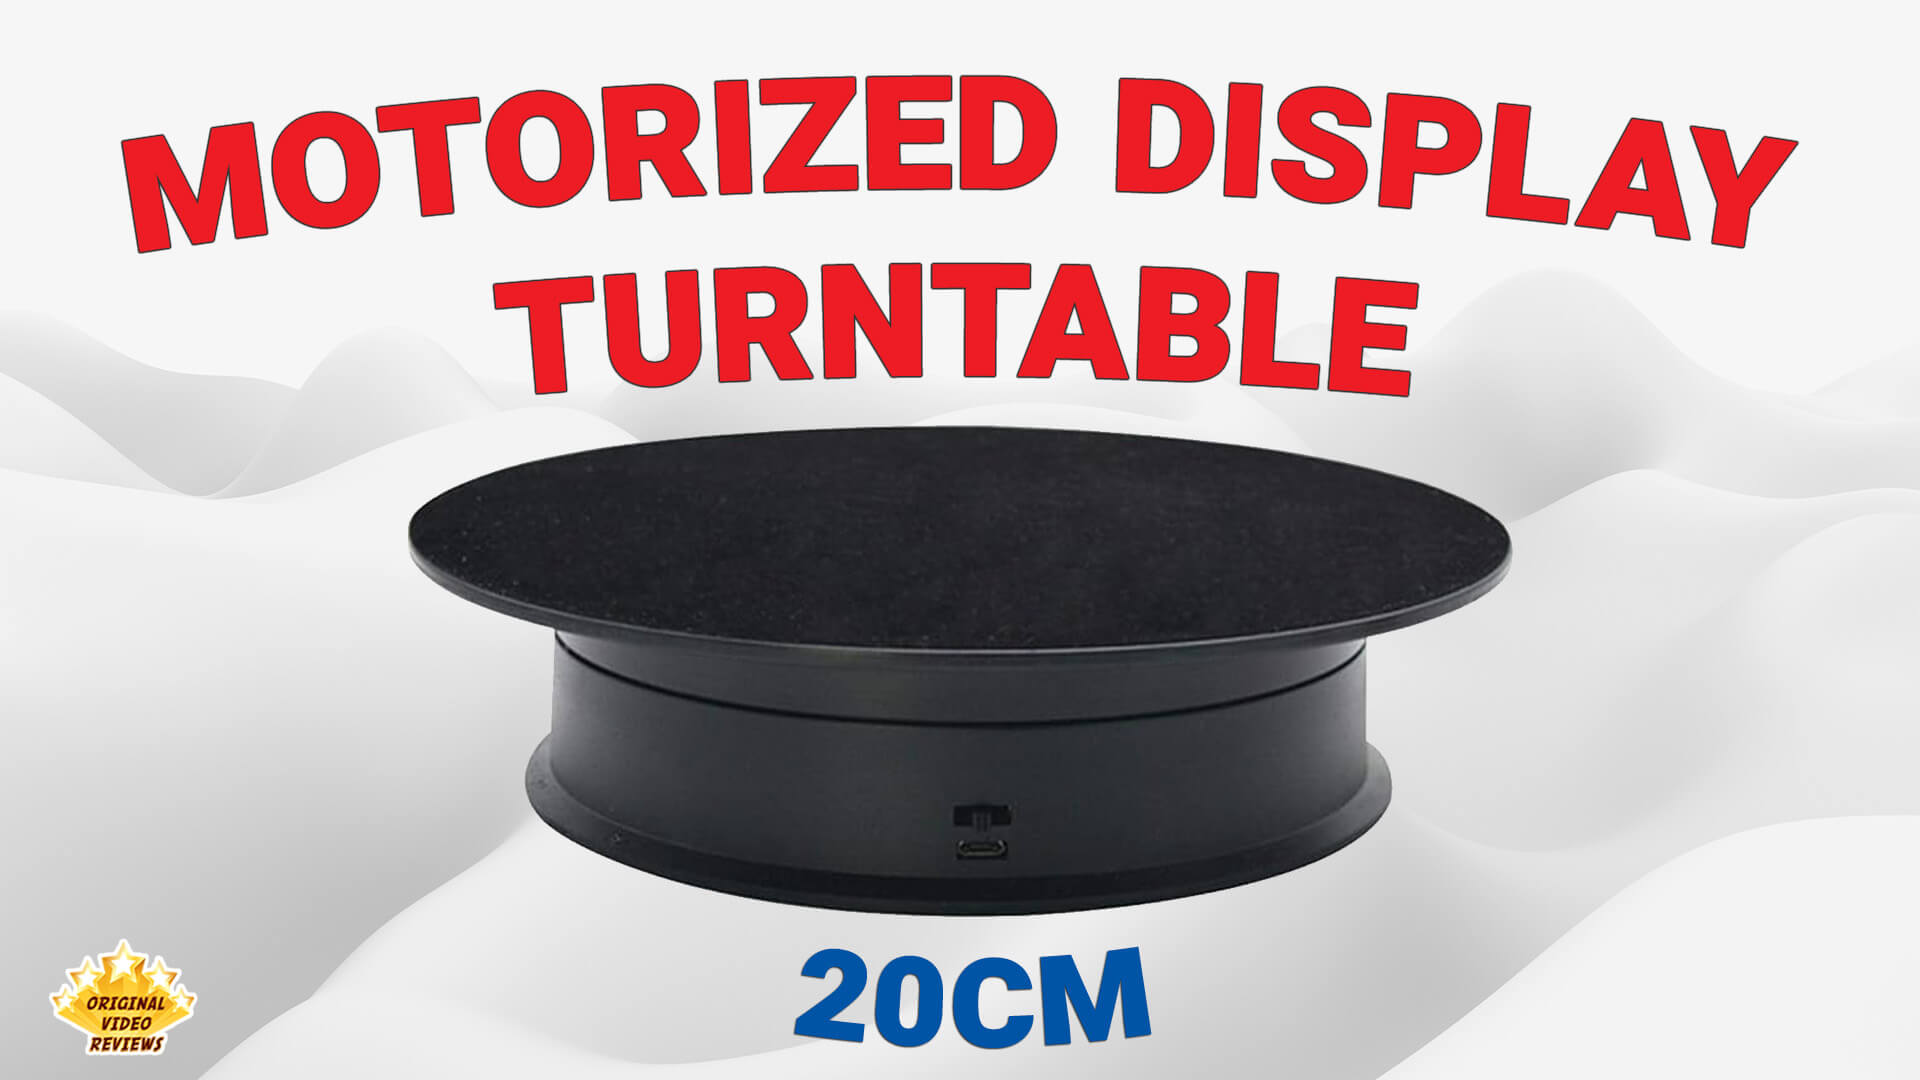 360-Electric-Display-Turntable-Stand-20cm-Review